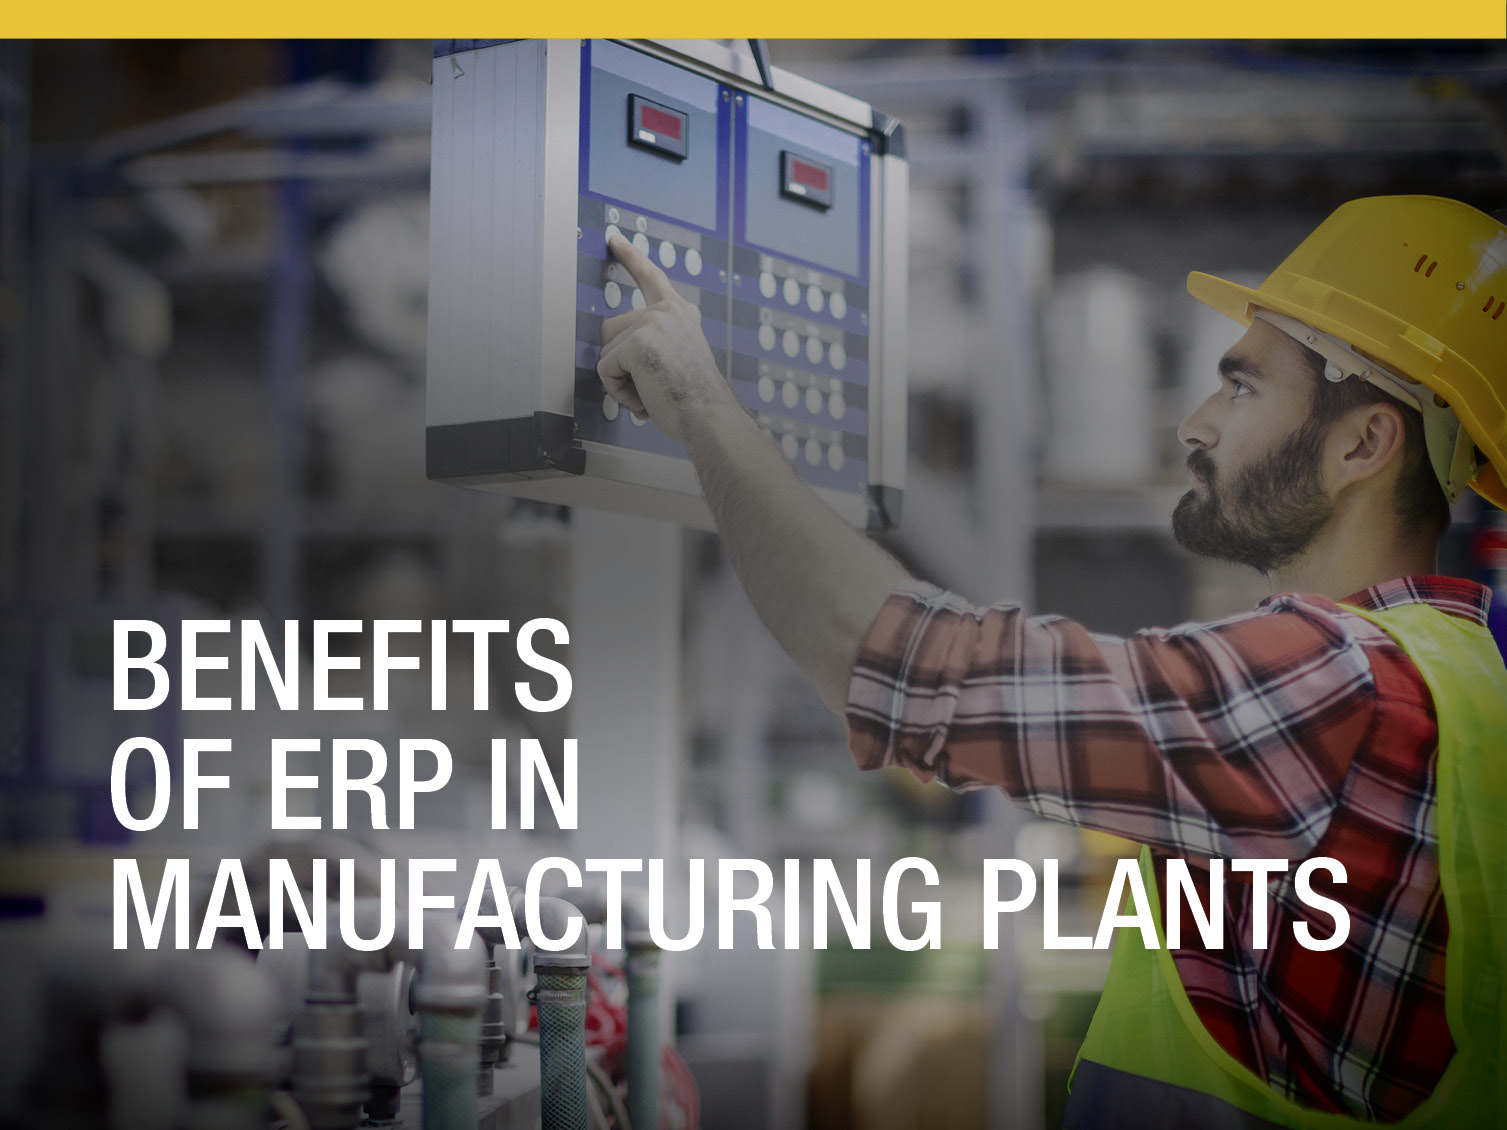 Benefits of ERP in Manufacturing Plants